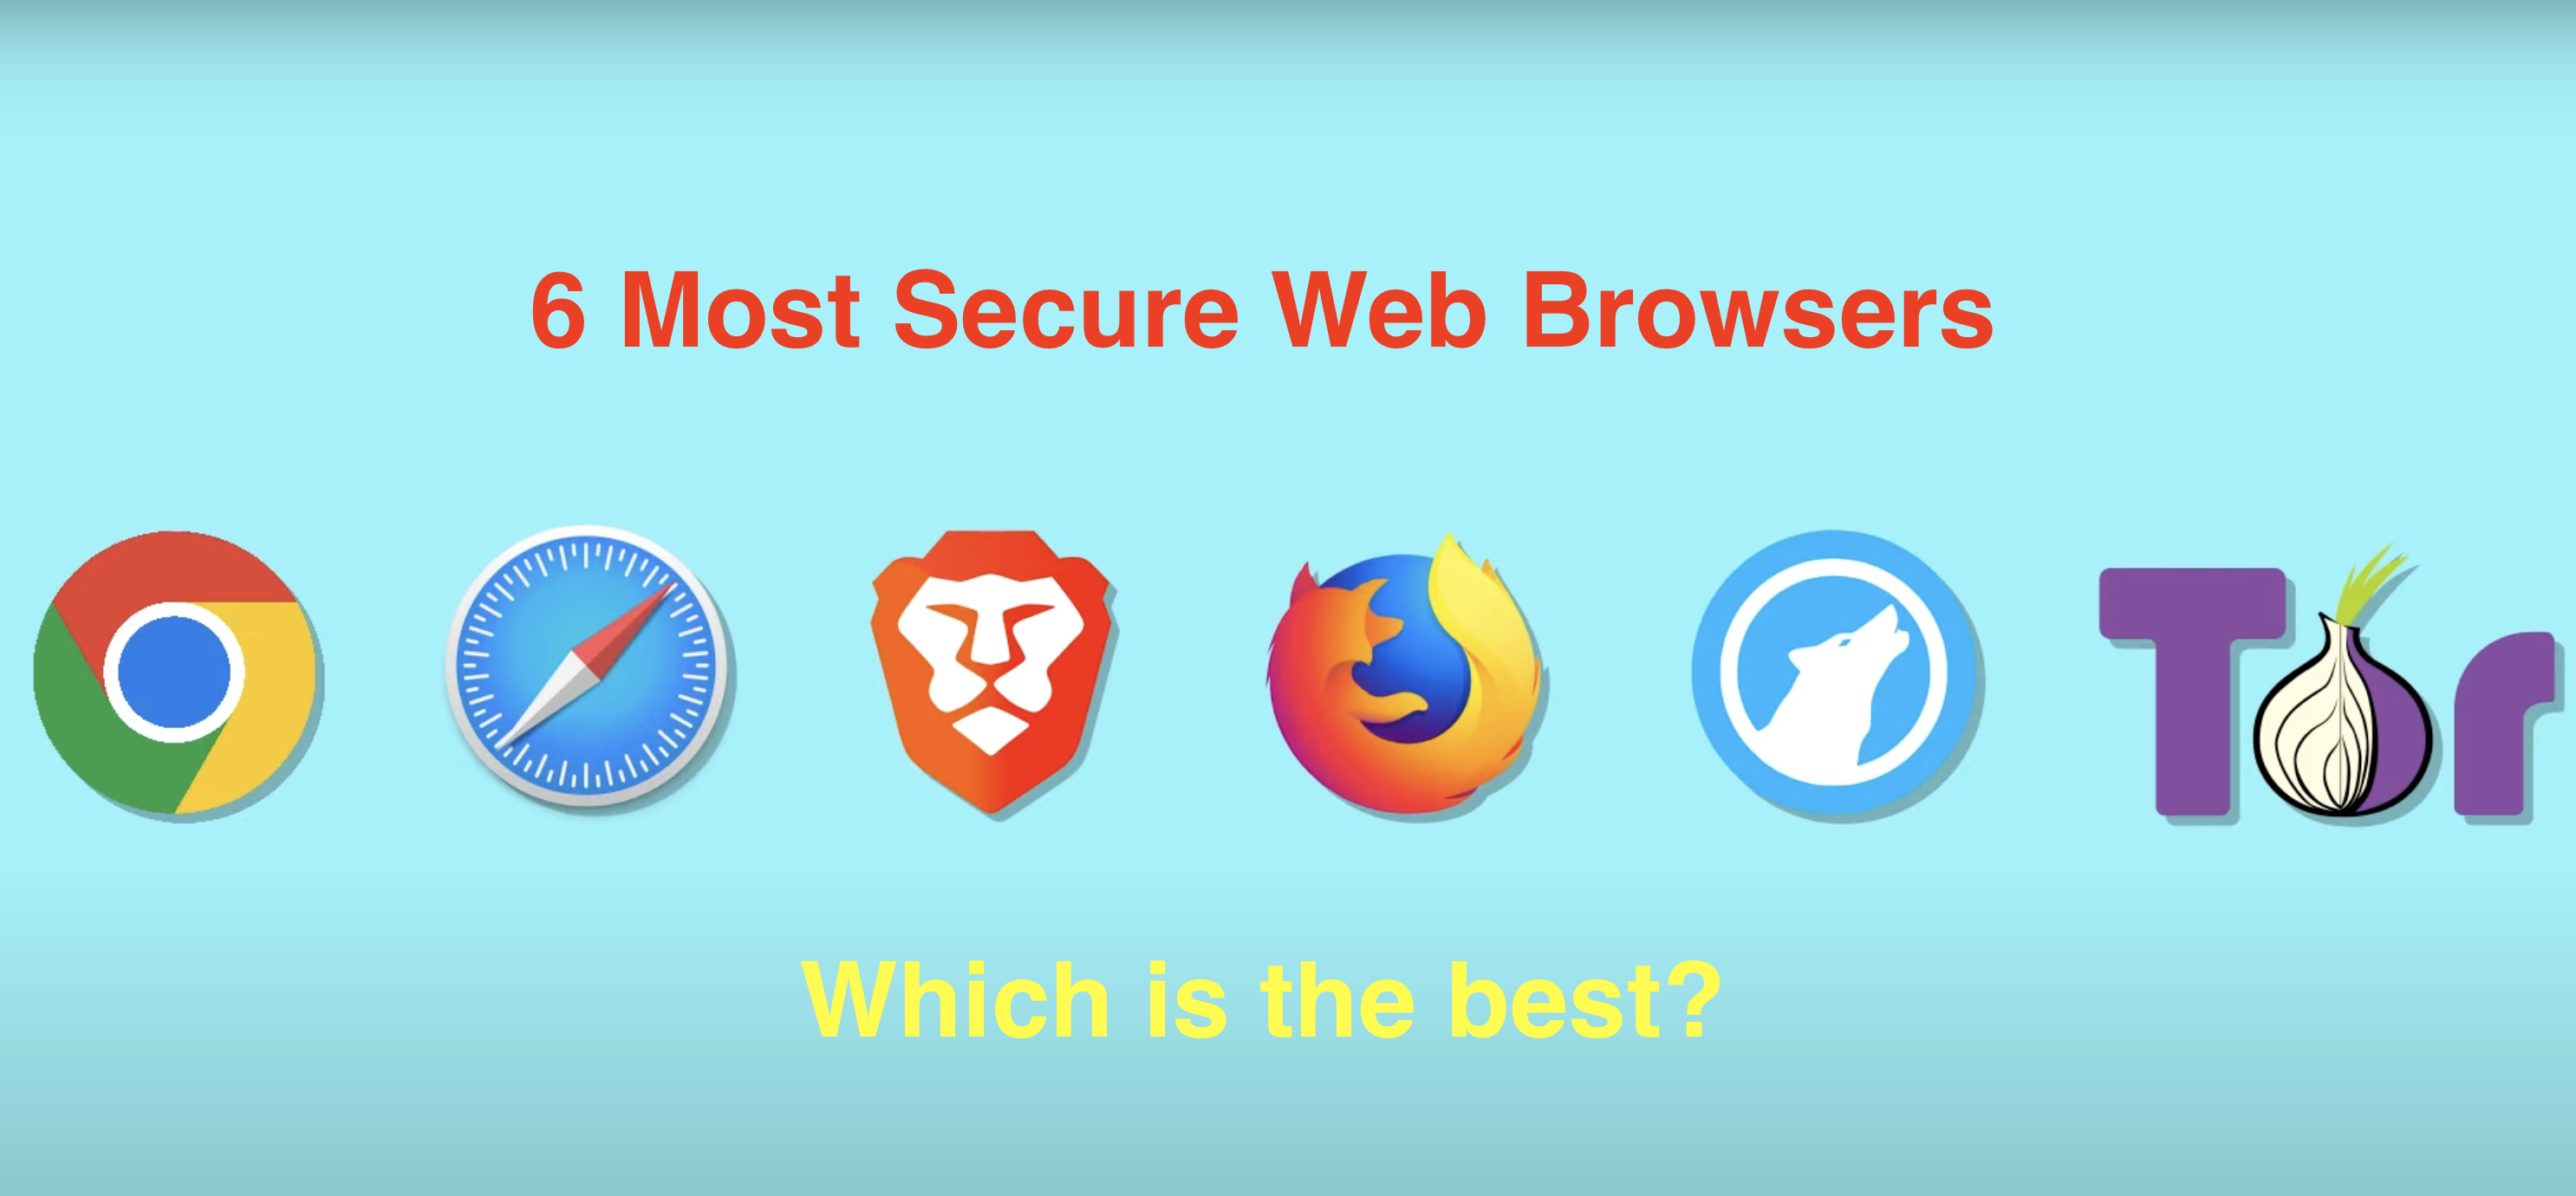 Top 6 Web Browsers